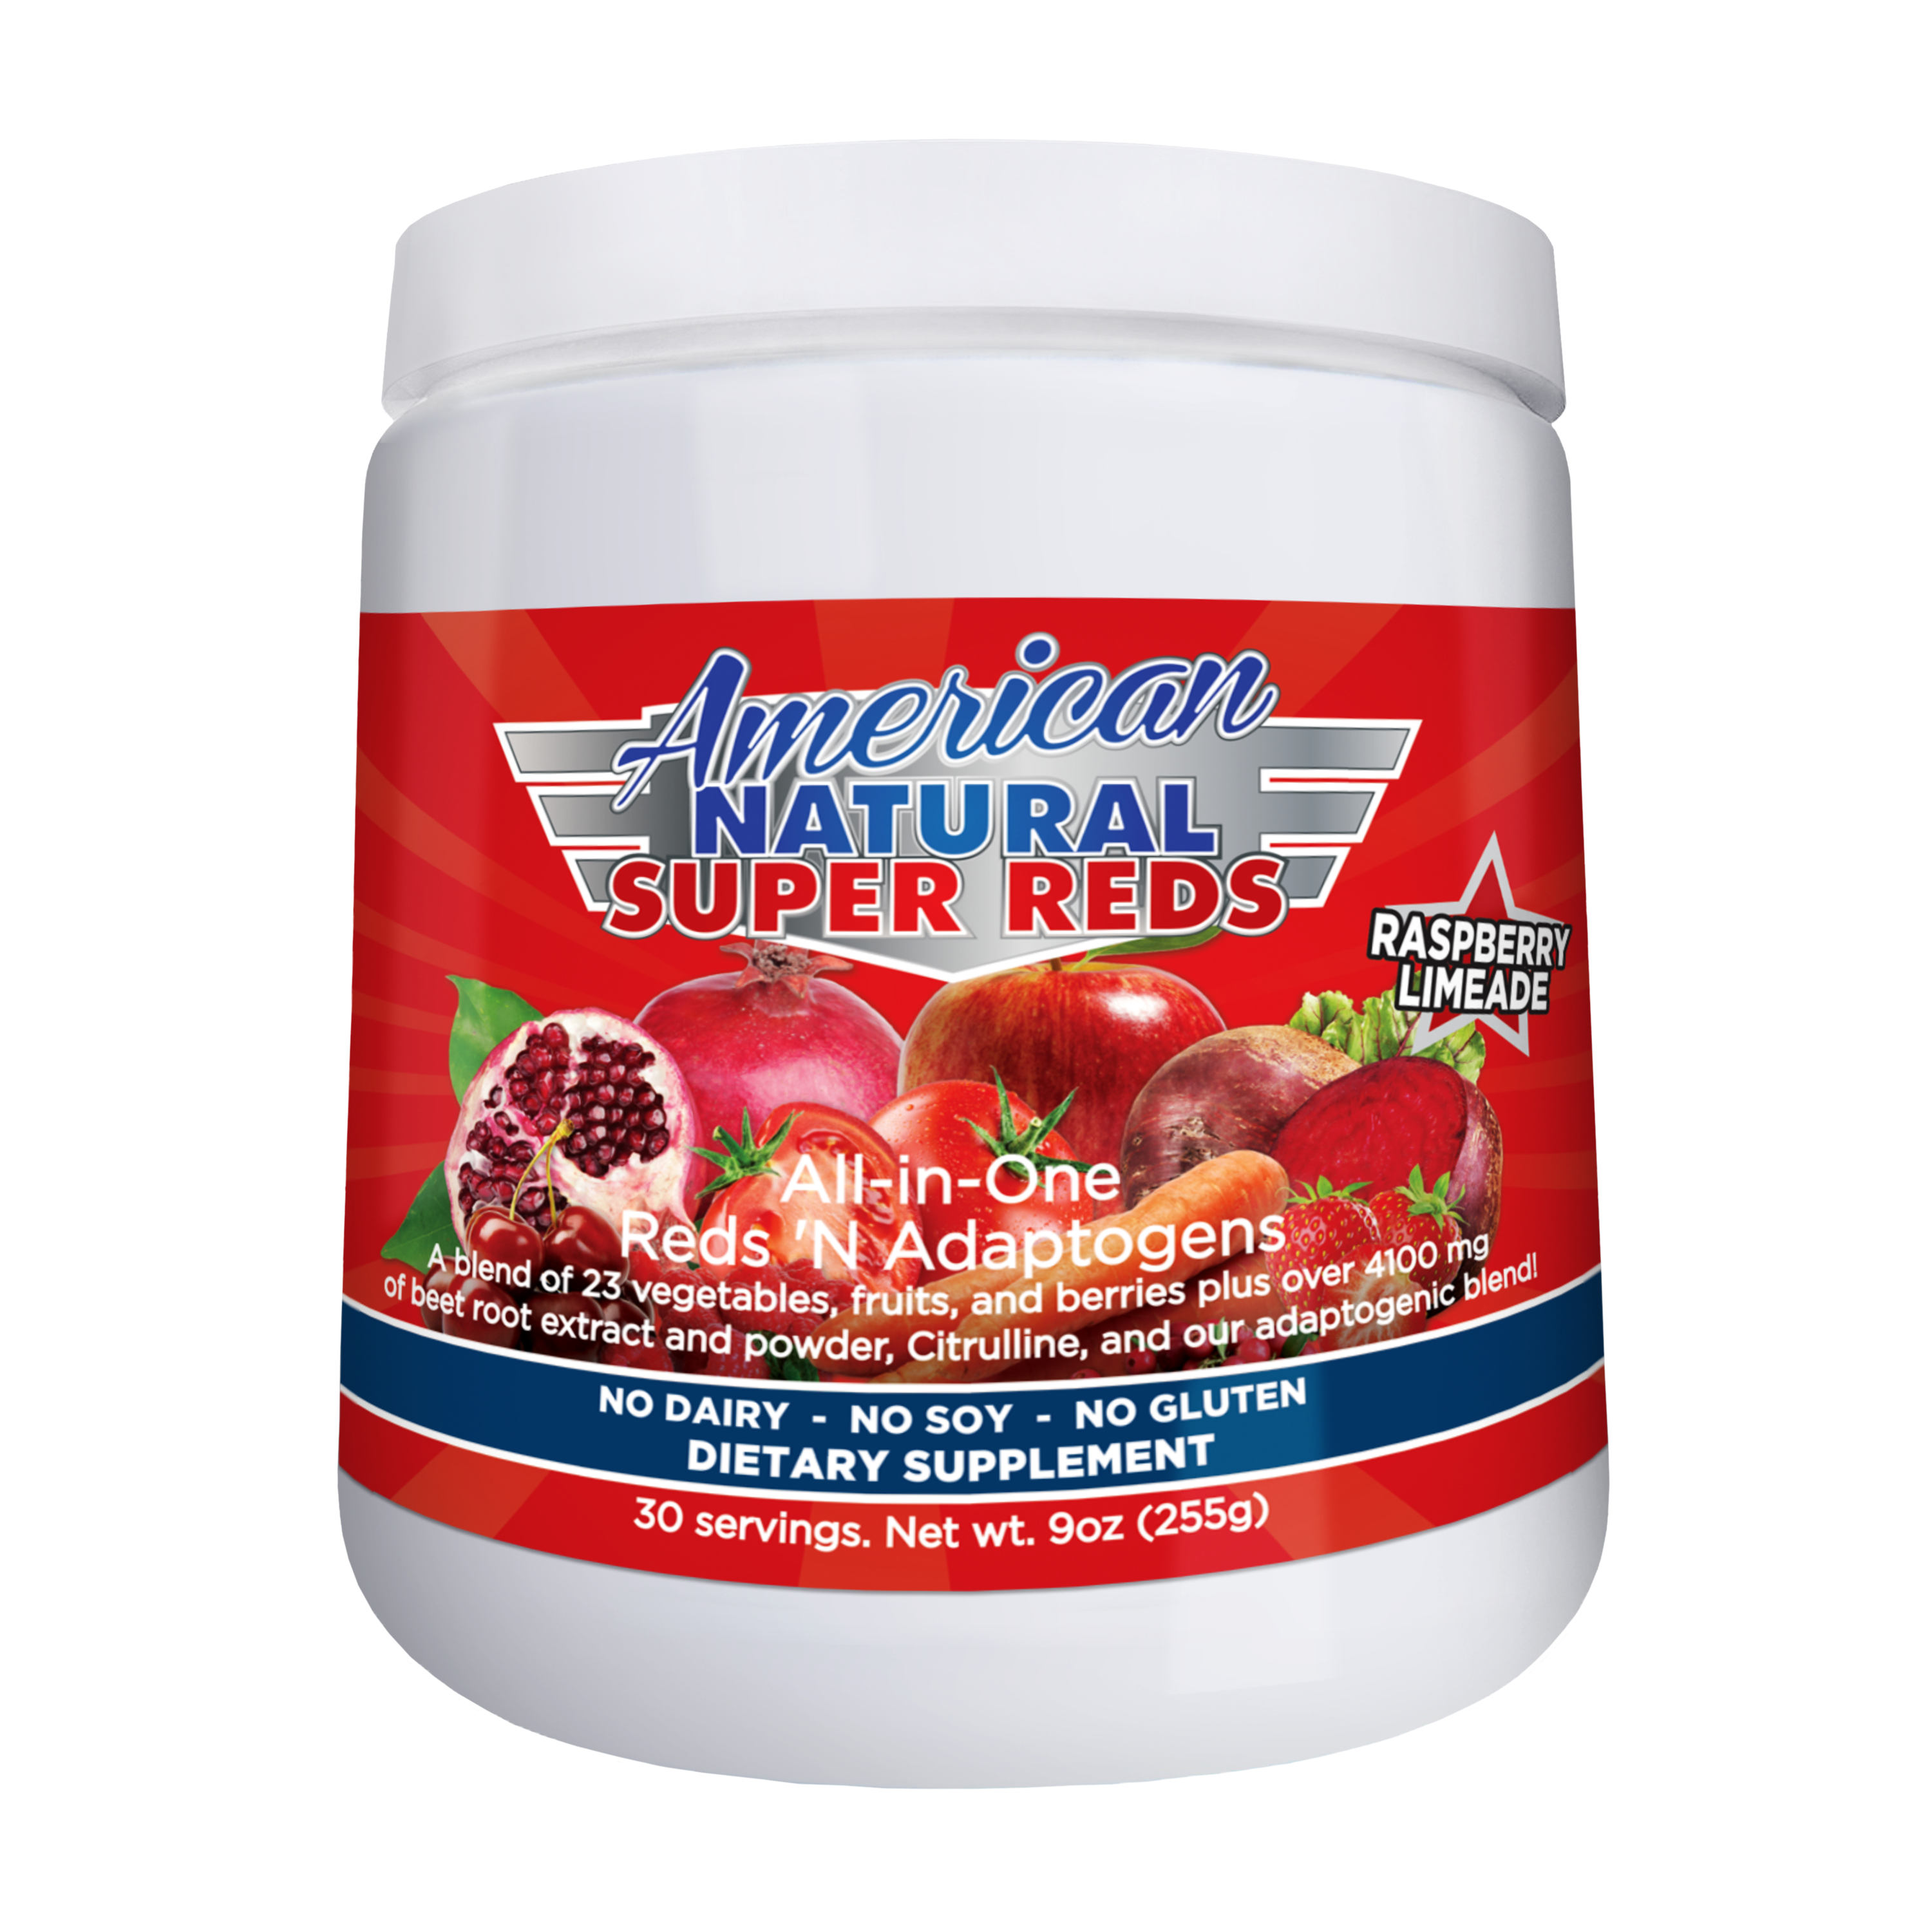 American Natural SuperReds Energy Mix - Full Month Supply American Natural SuperReds Energy Mix - Full Month Supply American Natural SuperReds Energy Mix - Full Month Supply American Natural SuperReds Energy Mix - Full Month Supply American Natural SuperReds Energy Mix - Full Month Supply American Natural SuperReds is an energy booster